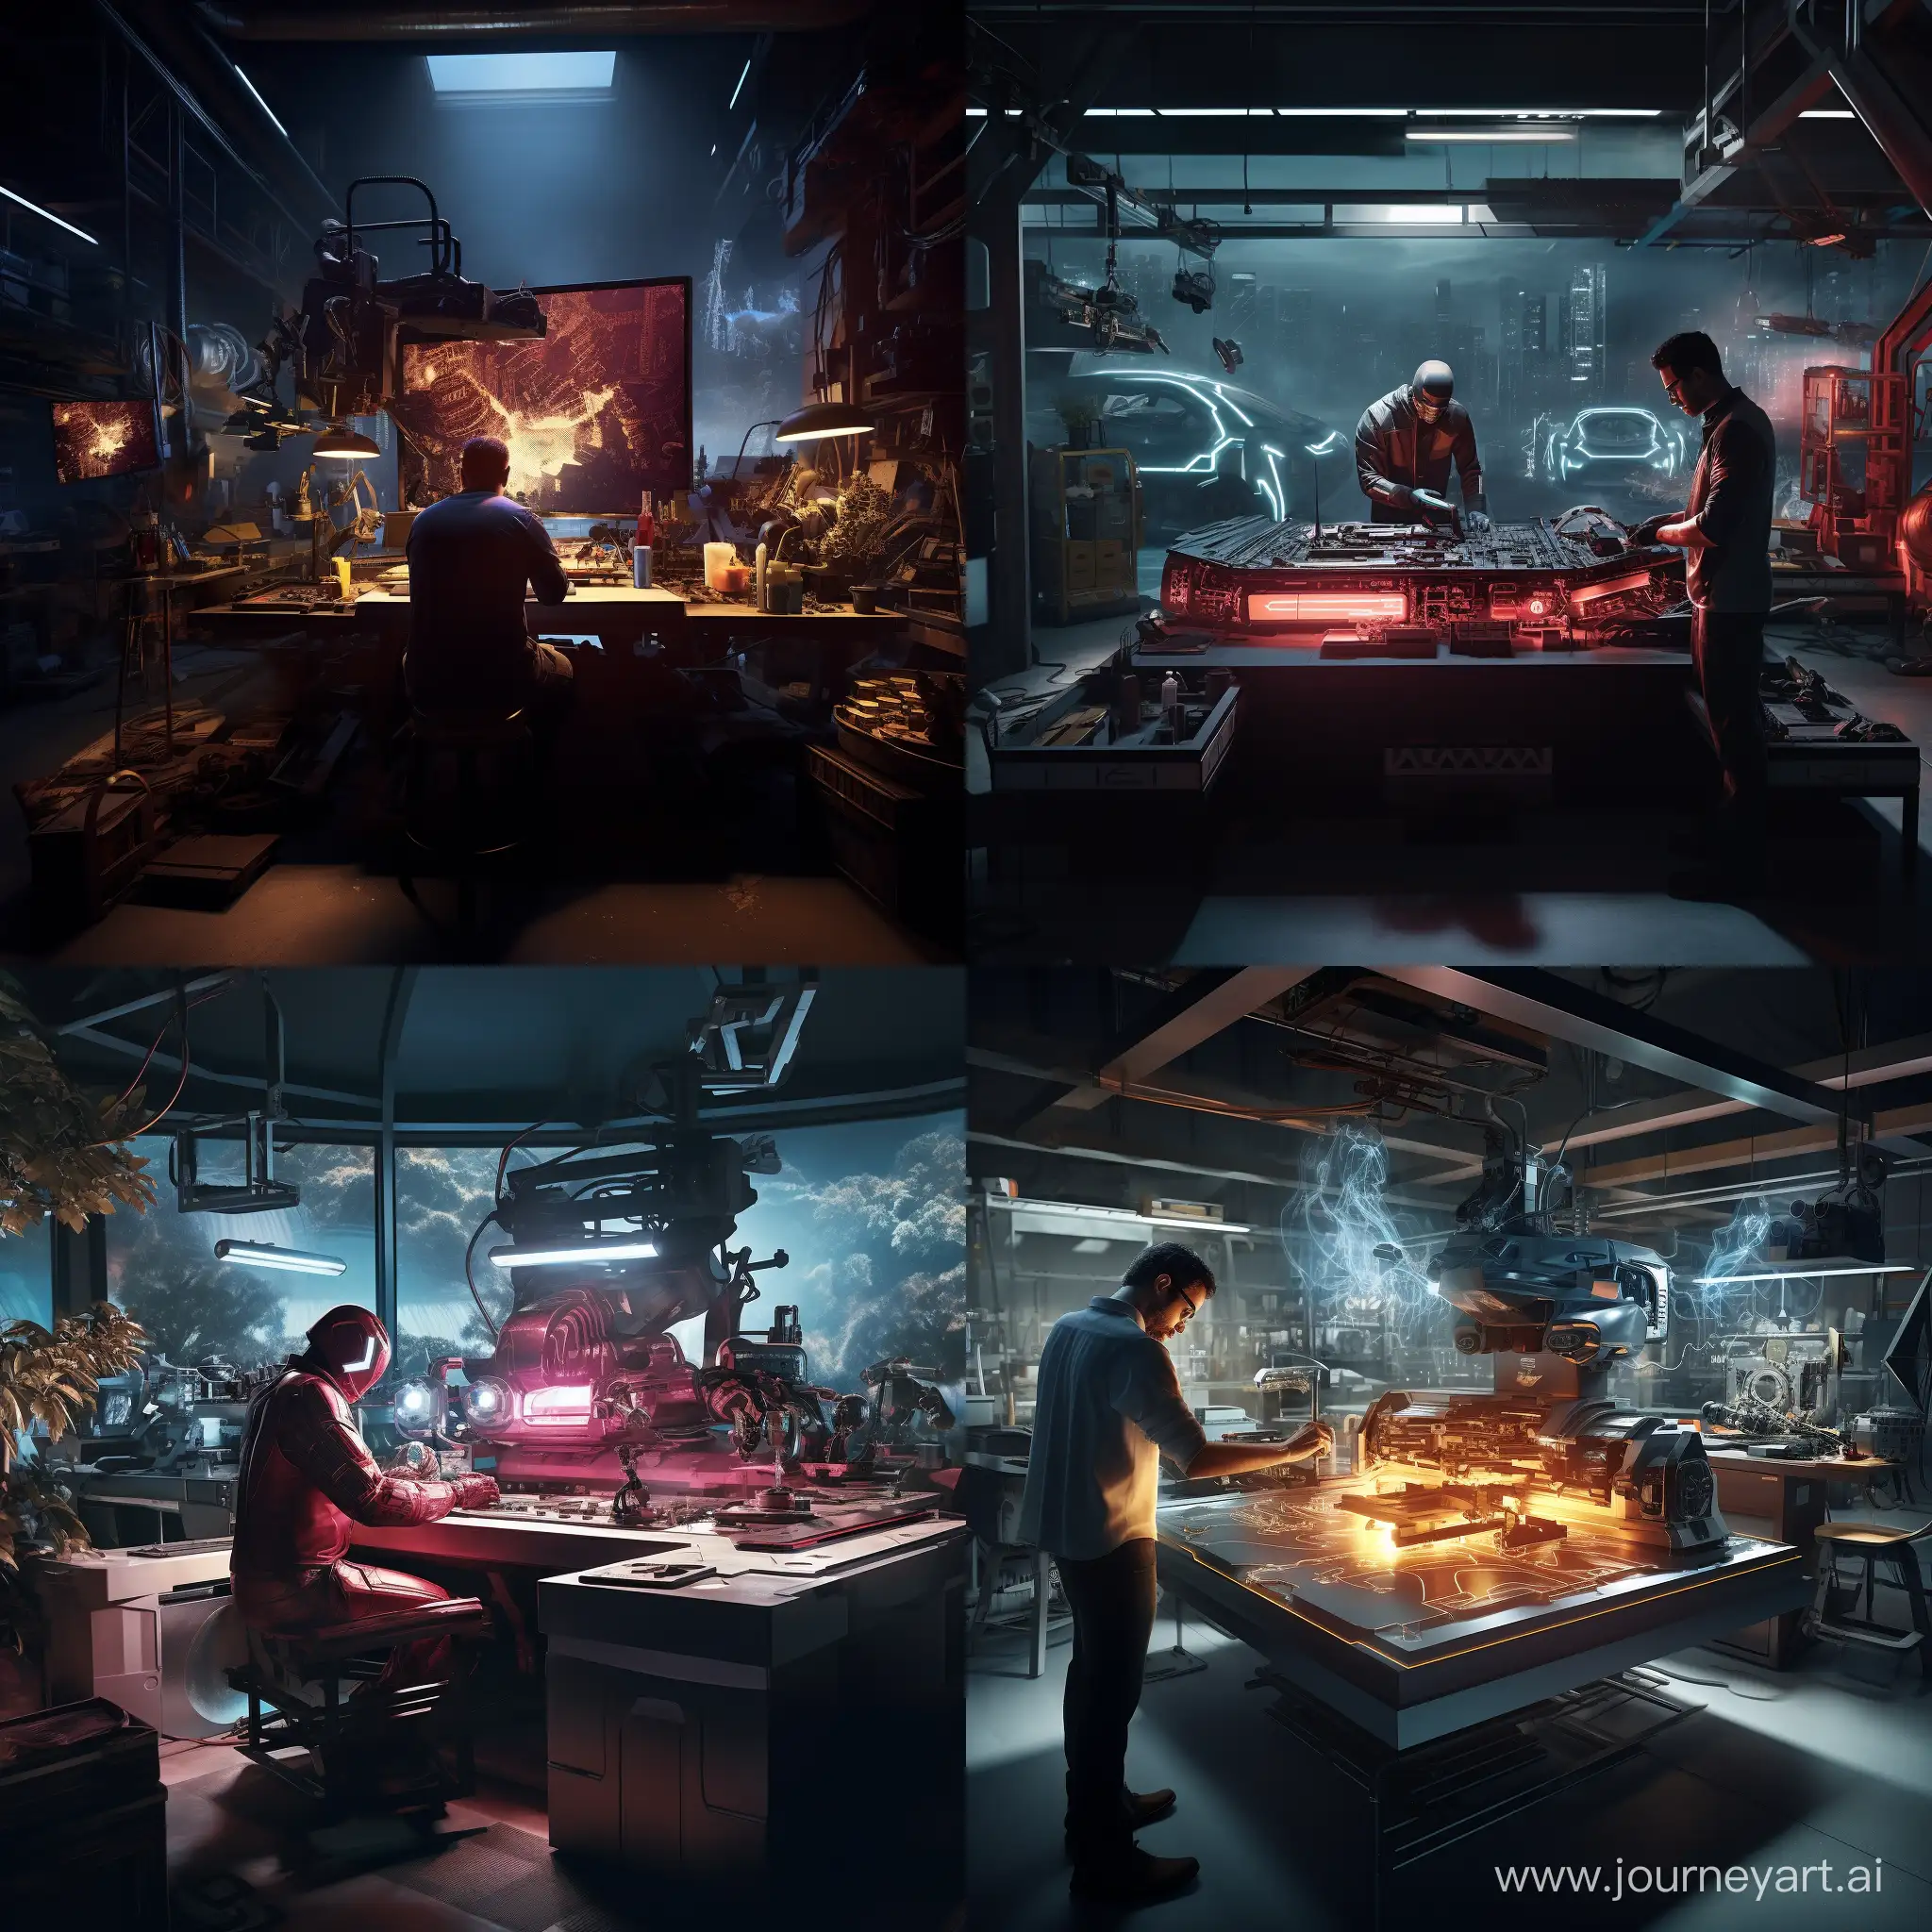 Generate a landscape image featuring a person in an expansive, high-tech workshop resembling Tony Stark's garage. The person, seen from the back, is operating a welding station on a wide desk equipped with cutting-edge robotics. Illuminate the scene with strategically placed lighting to highlight the workstation and create a dynamic atmosphere. Ensure super clarity and high detail throughout, with a focus on the welding process, including realistic sparks and the glow of the operation. Incorporate an art station quality, emphasizing sleek and futuristic design elements reminiscent of Tony Stark's style. The image should convey an advanced technological environment with intricate details, textures, reflections, and shadows, meeting the standards of a professional art station.